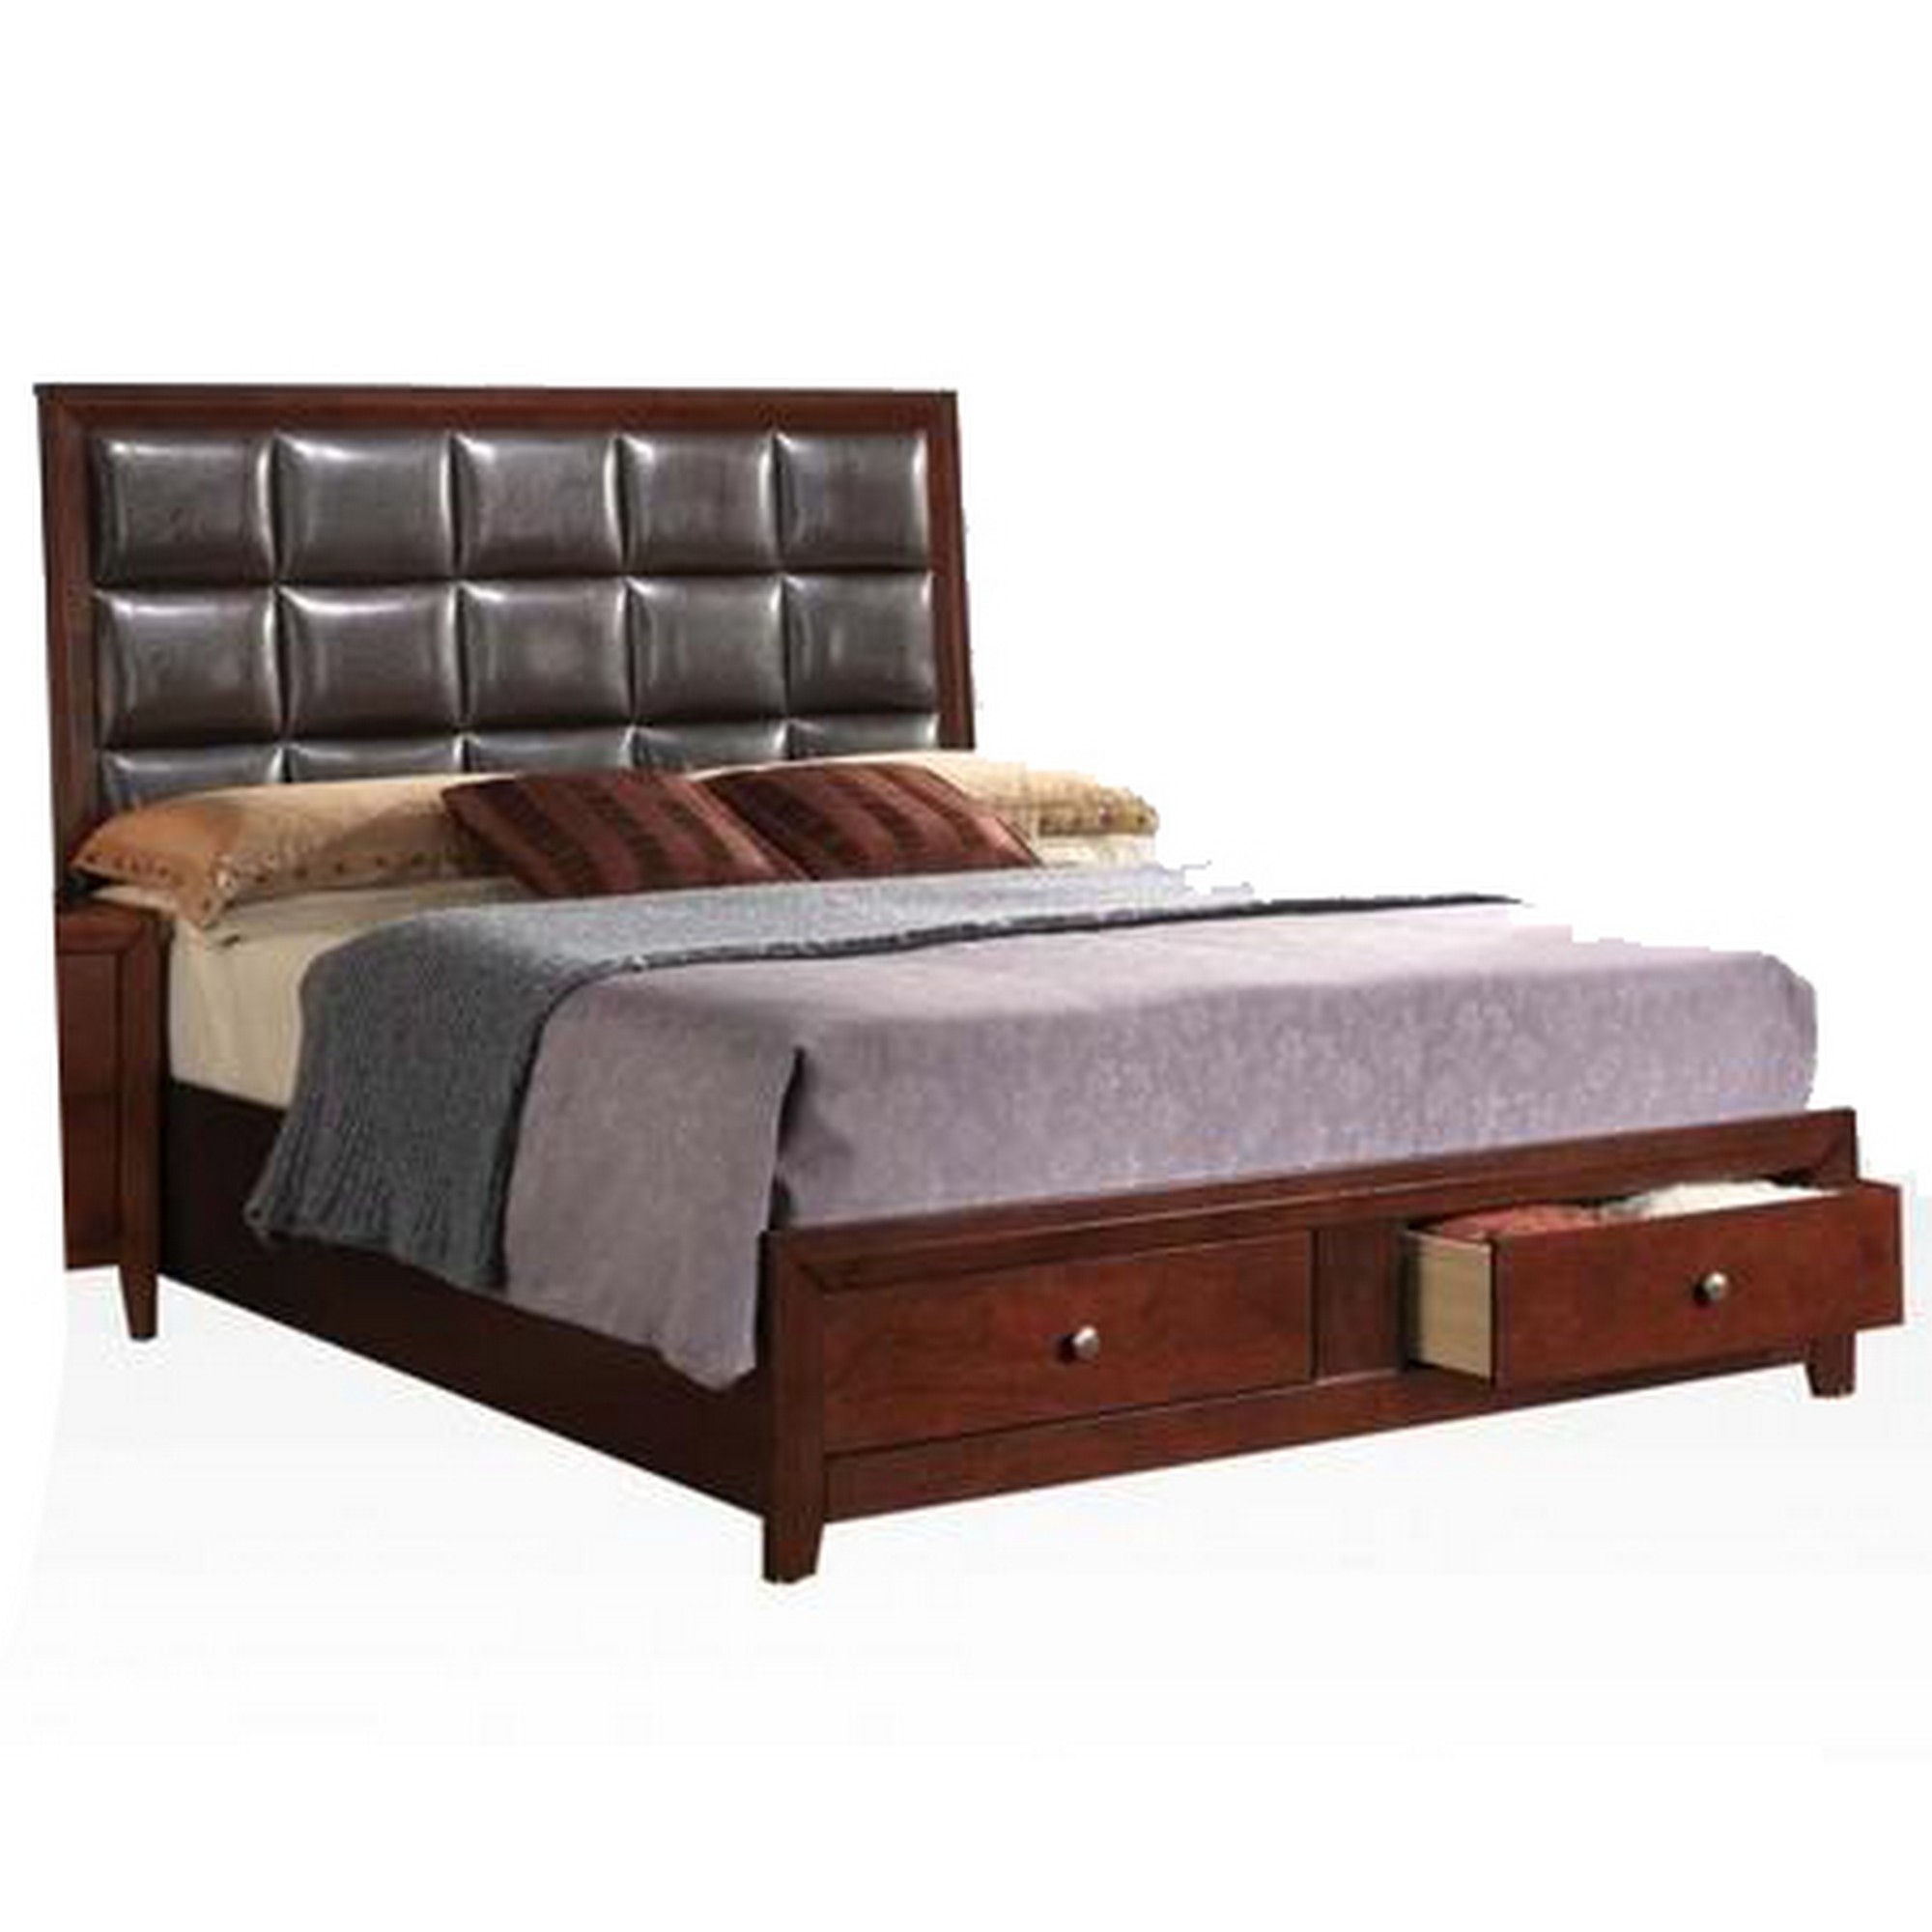 Well Designed Luxurious Queen Size Bed With Storage, Brown- Saltoro Sherpi